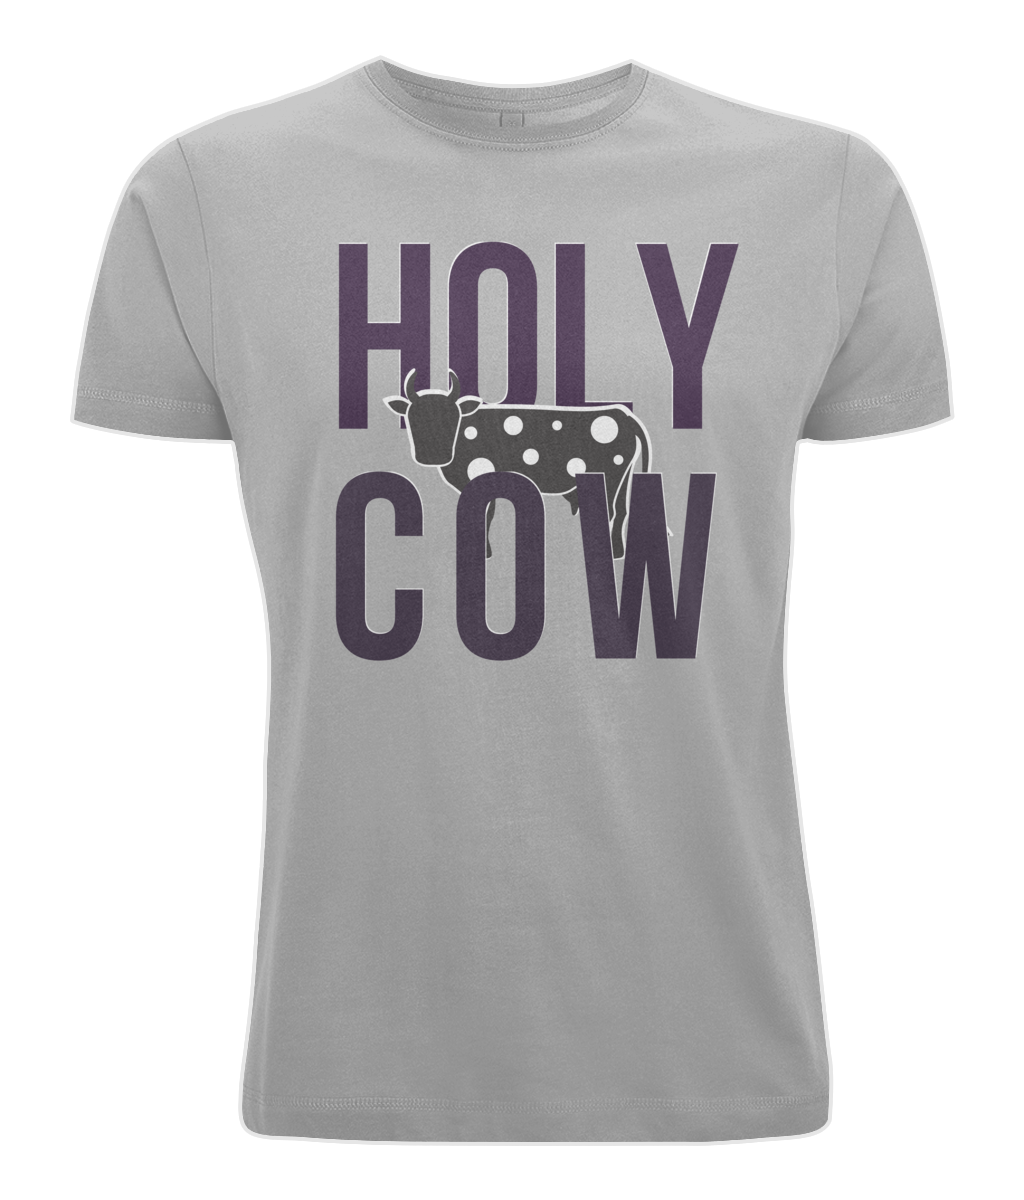 Hole-y Cow: Unisex Cotton Tee